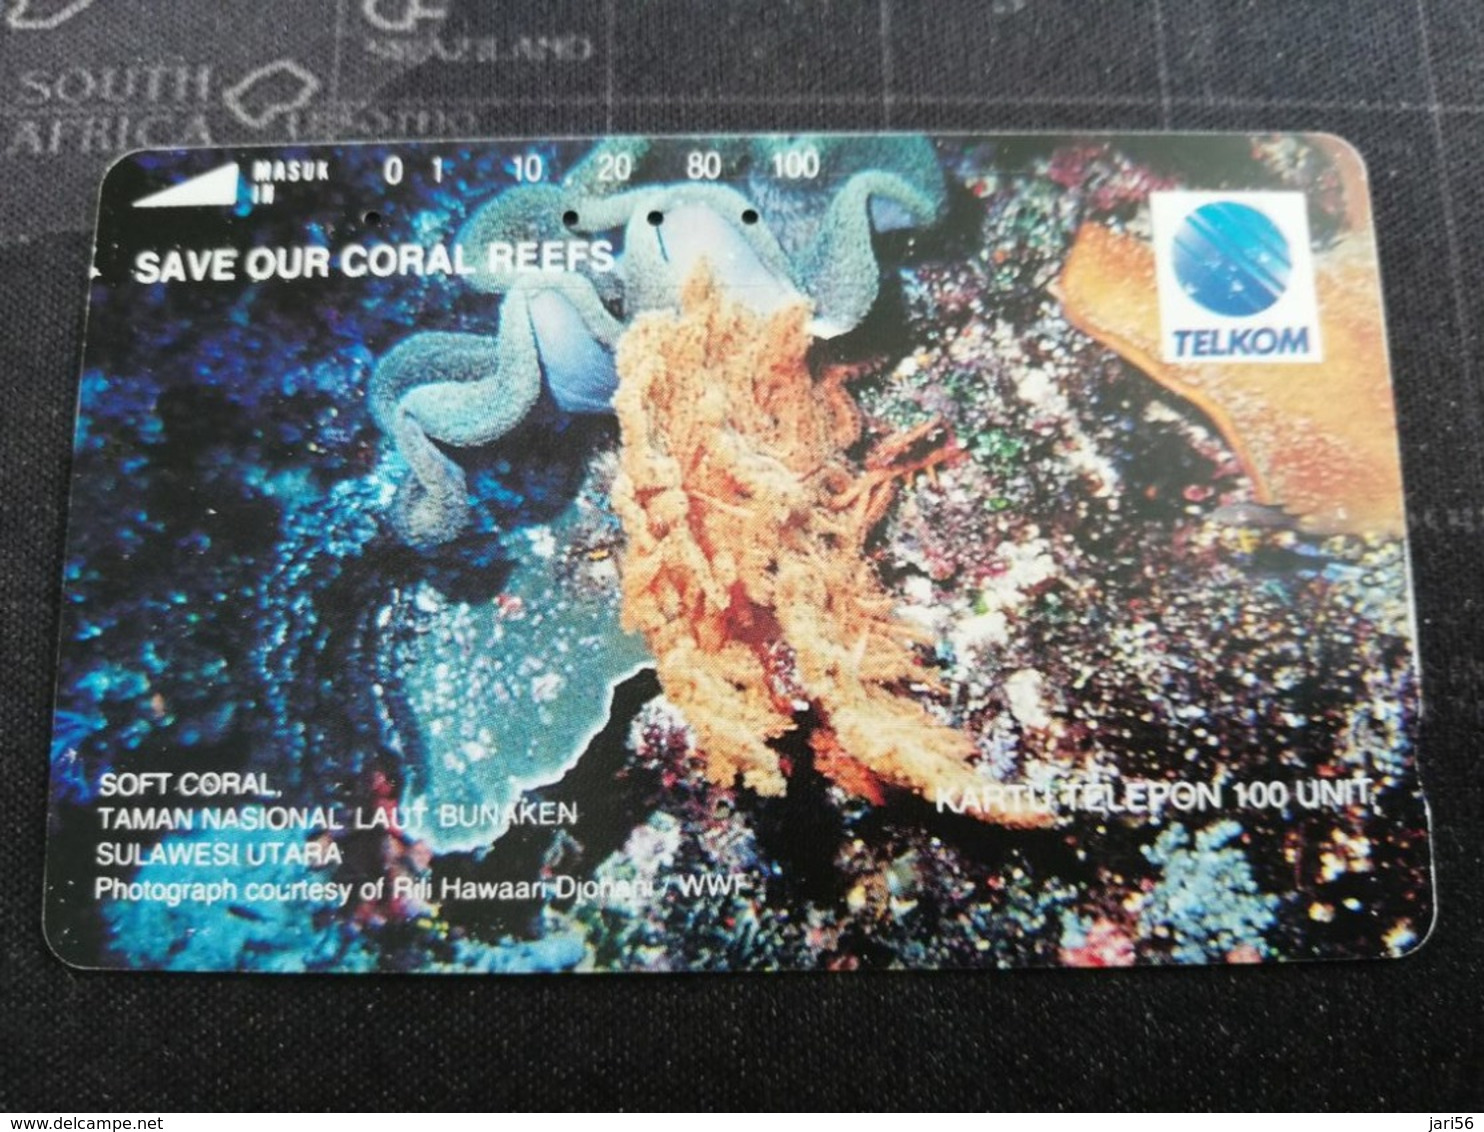 INDONESIA MAGNETIC/TAMURA  100 UNITS  SOFT CORAL / CORAL REEFS         Fine Used Card   **3031 ** - Indonesia